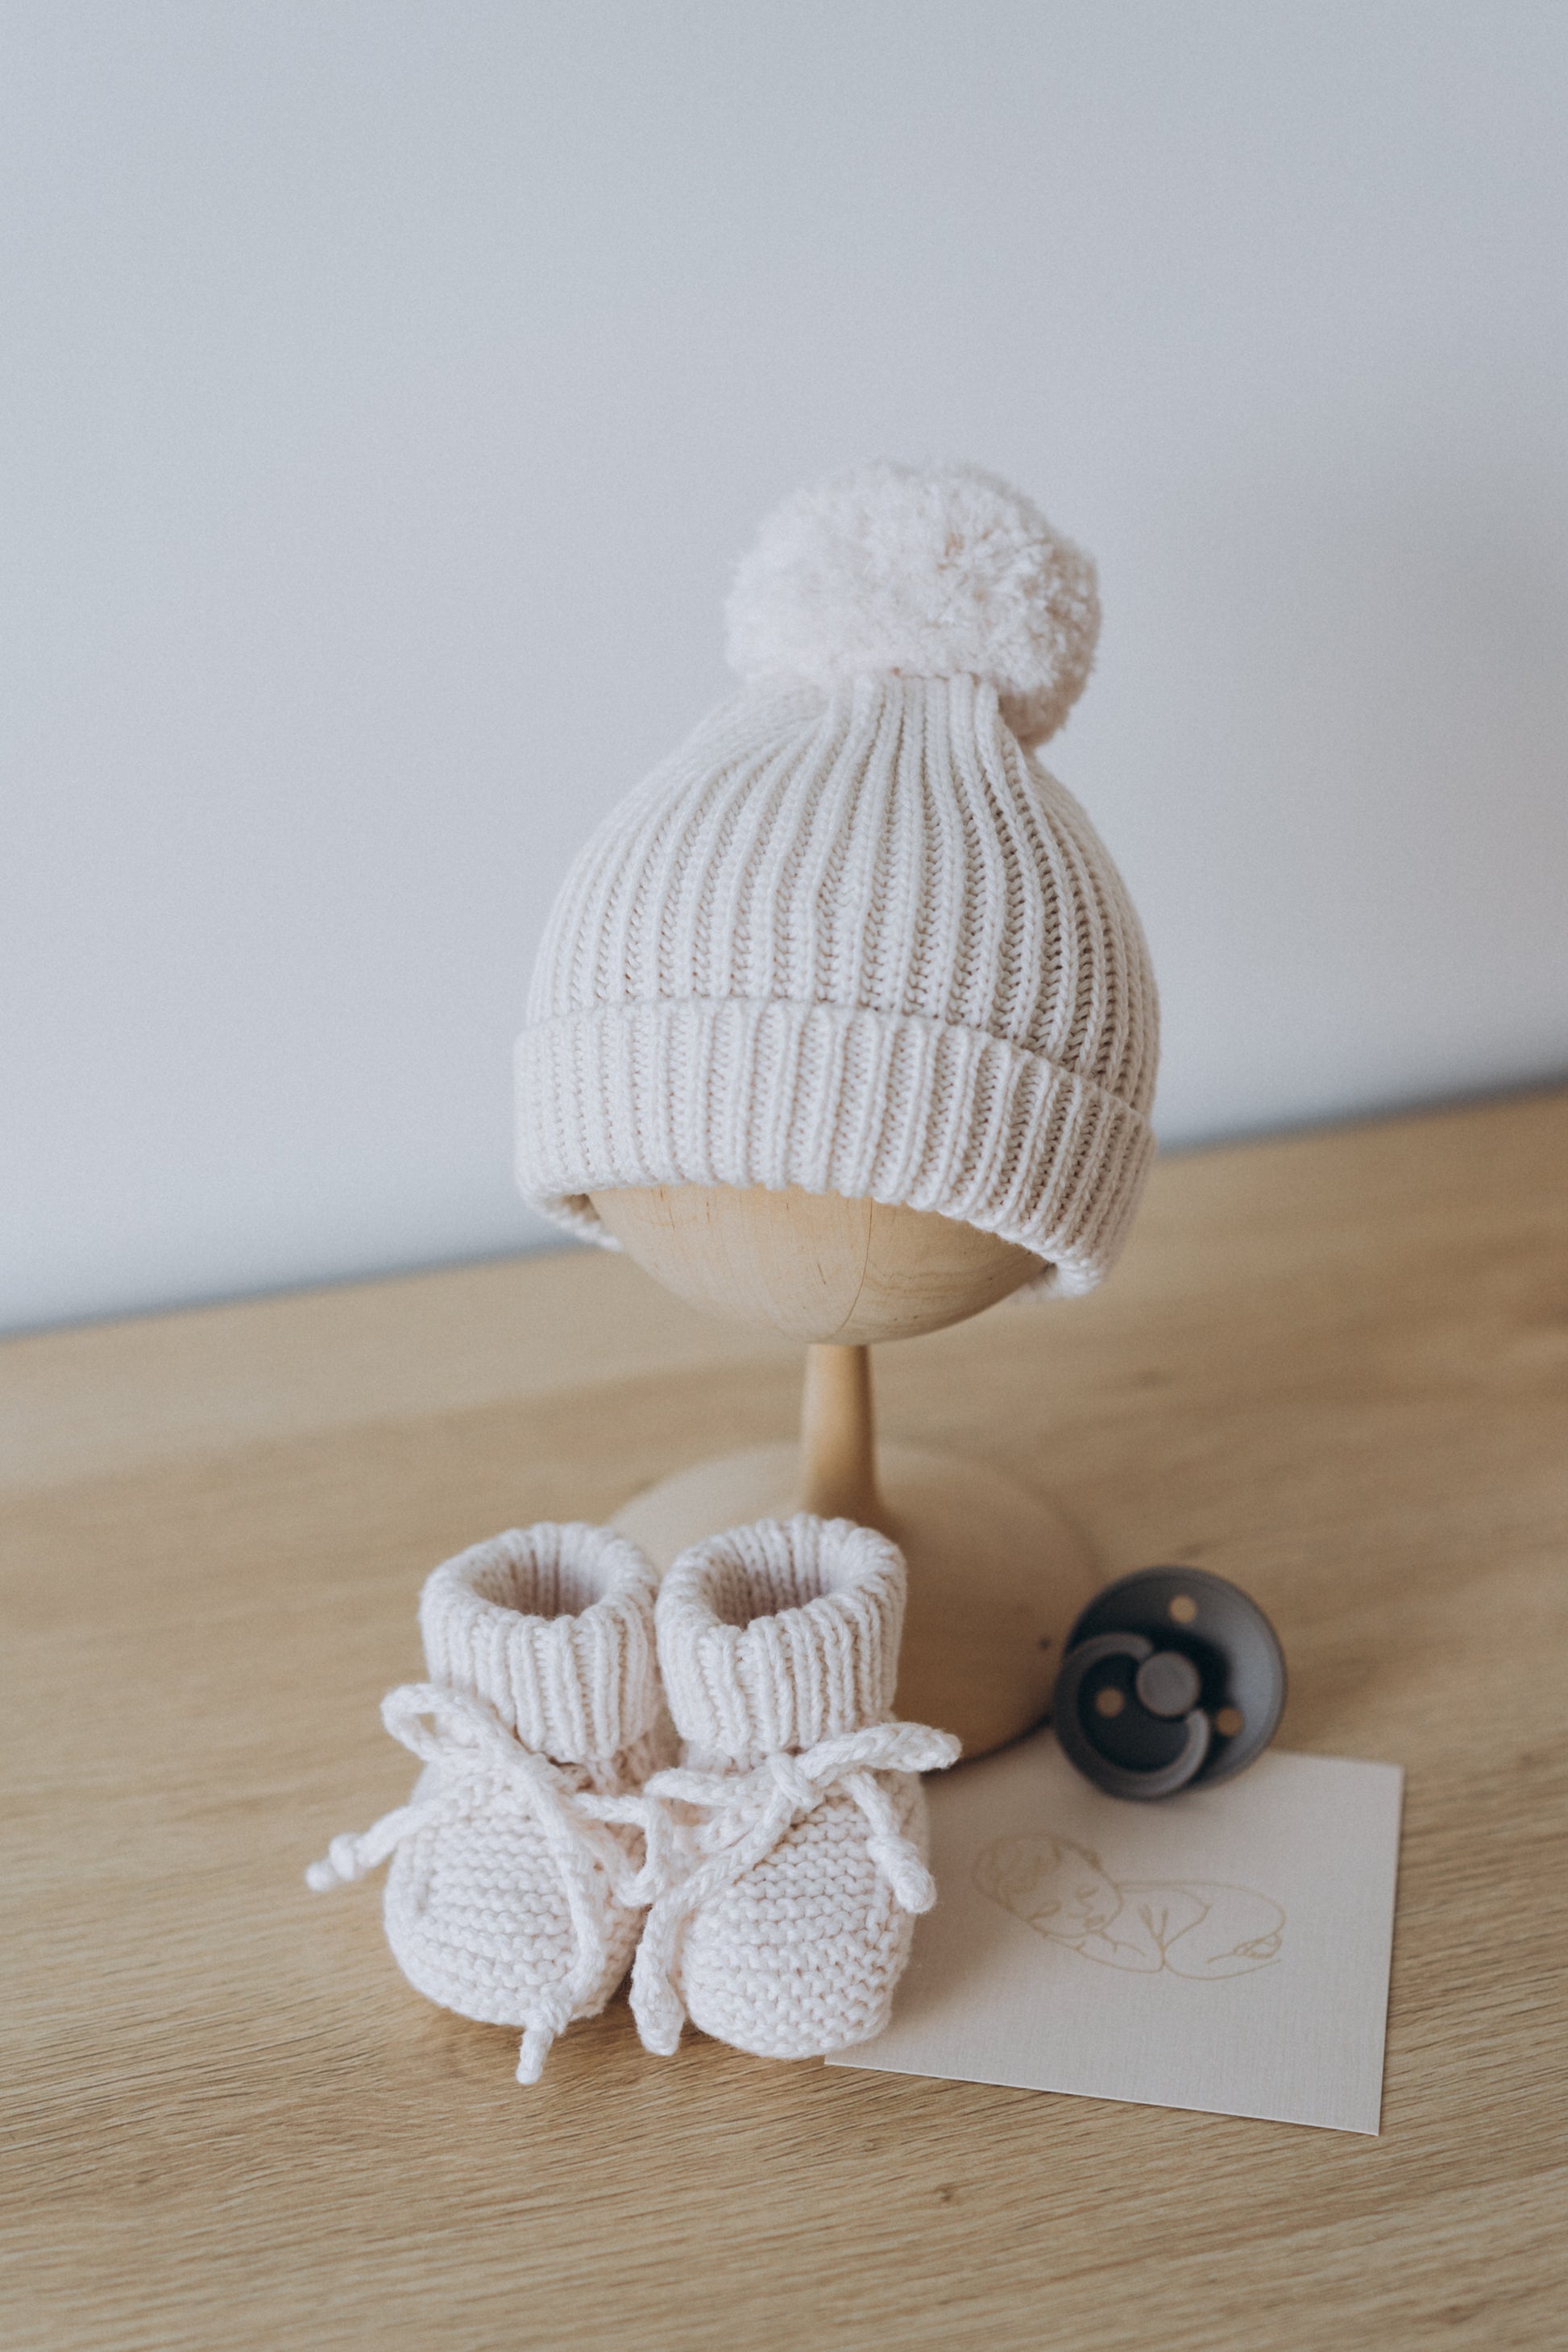 newborn knit outfit, baby knit hat, baby crochet booties, gender neutral outfit, mom to be gift, new baby gift basket